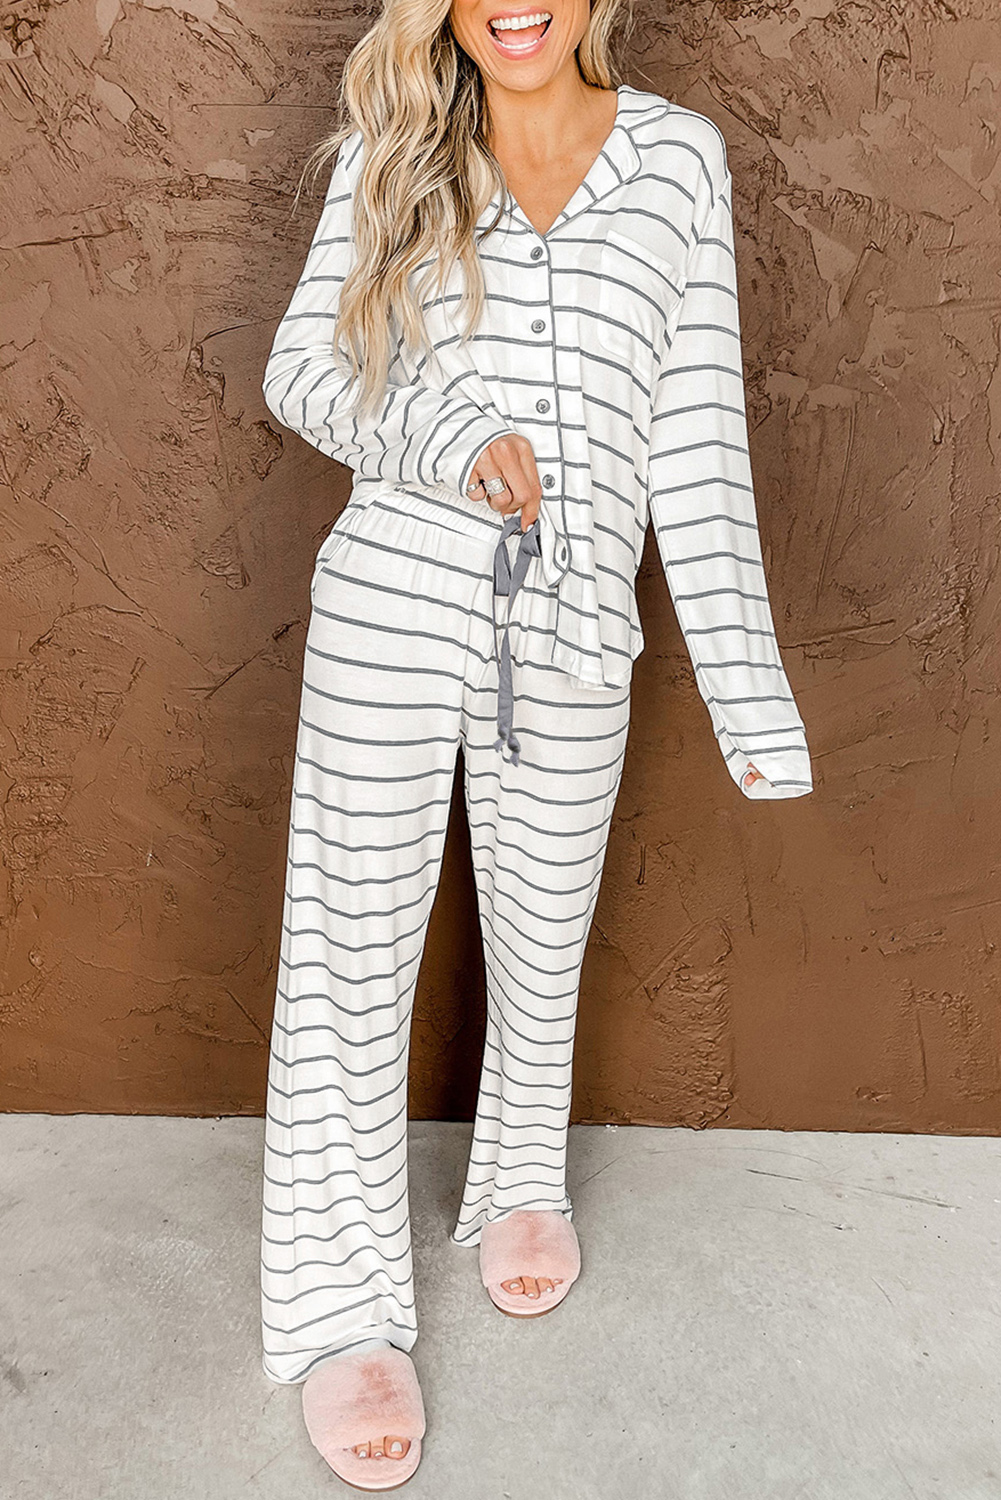 Shewin Wholesale Clothes Suppliers White Striped Print Long Sleeve Top & Drawstring Pants PAJAMAS Se